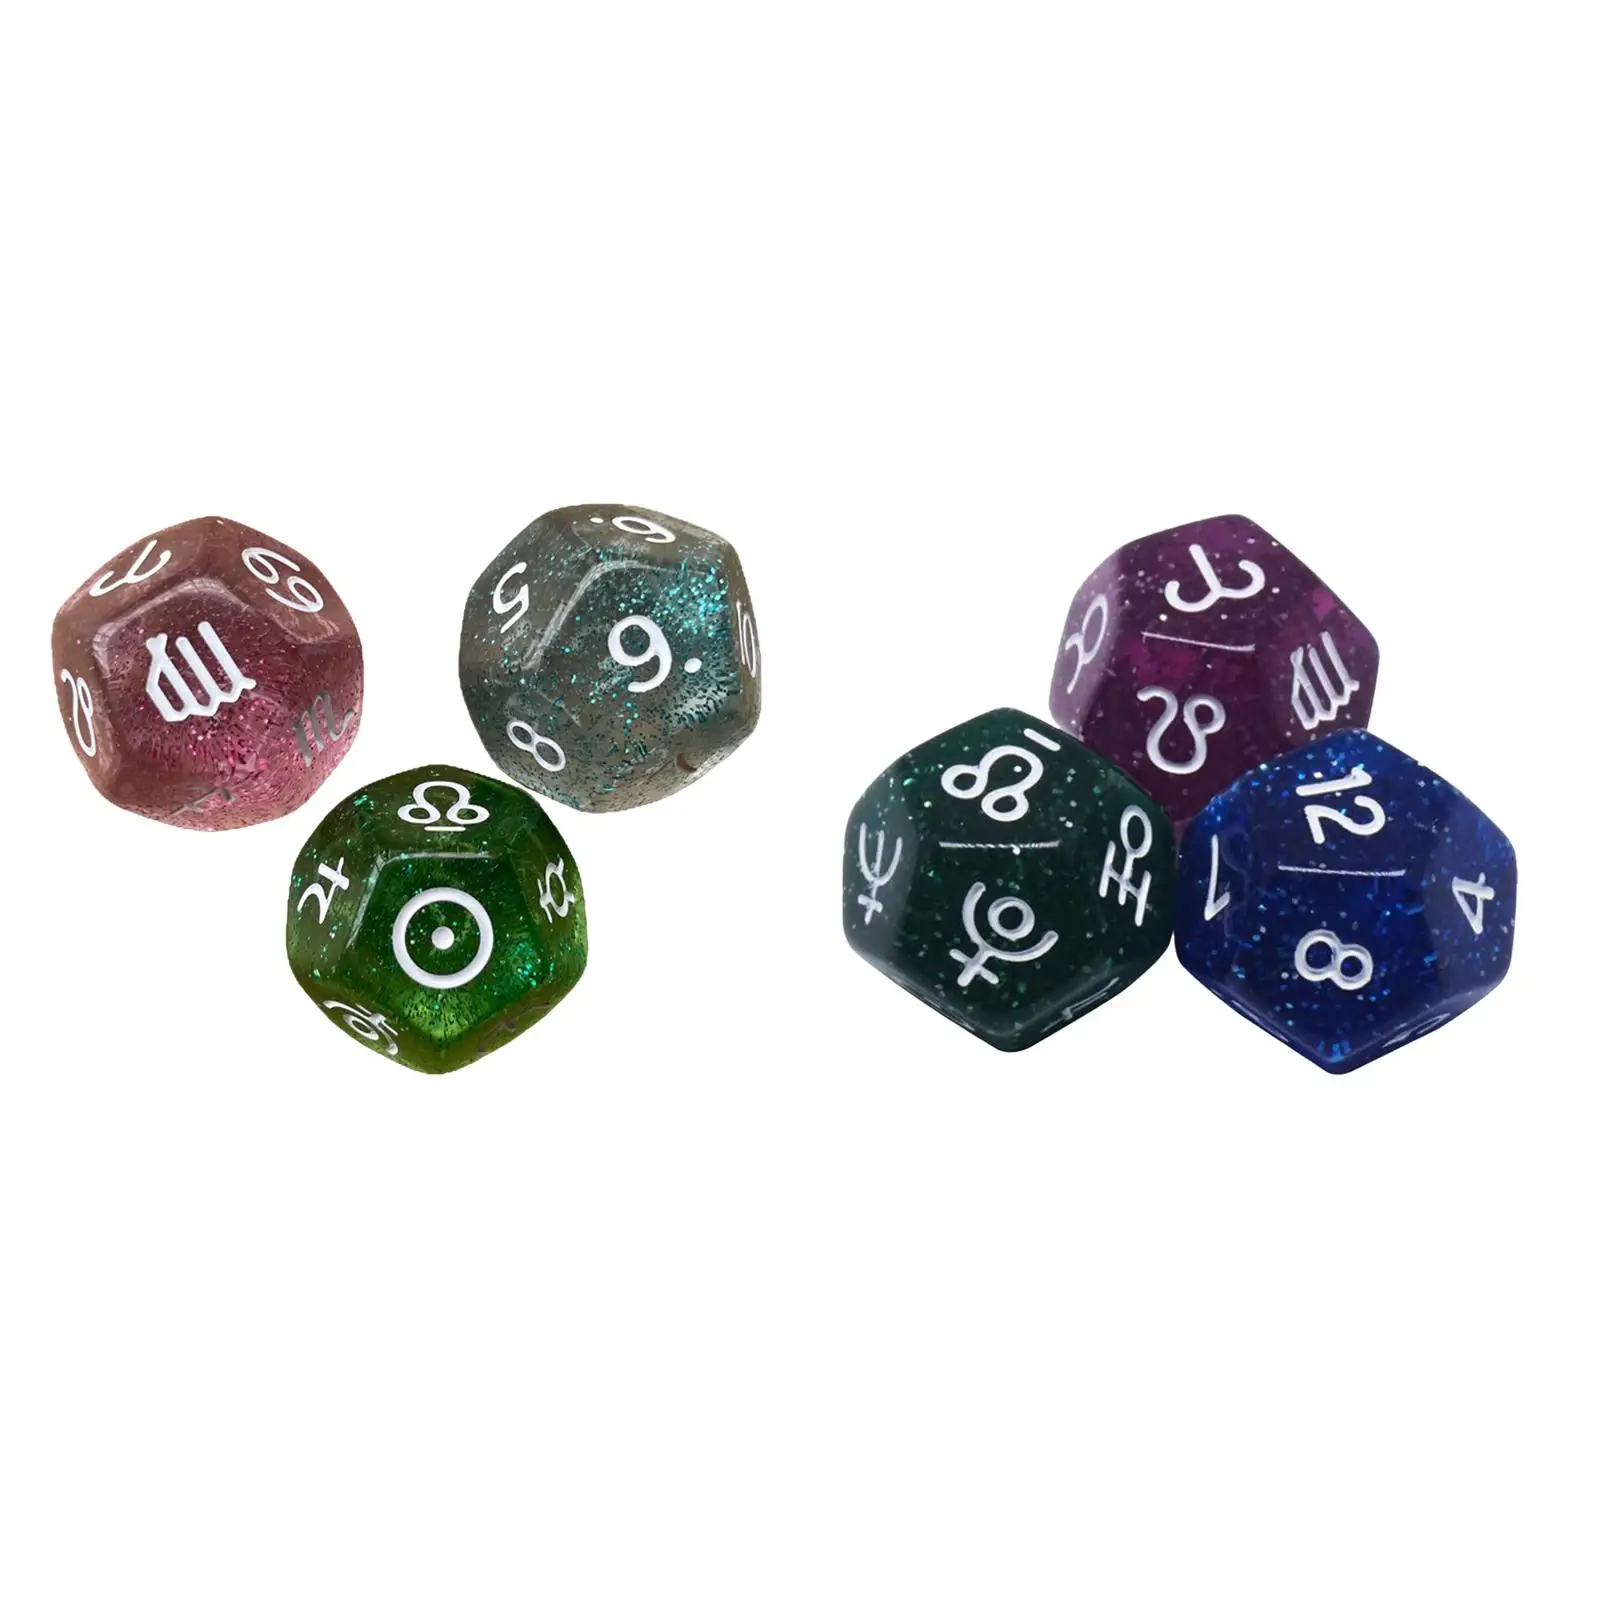 3Pcs Astrological Dice, 12 Sided Polyhedral Dice, Astrology Card Constellation Dice Set